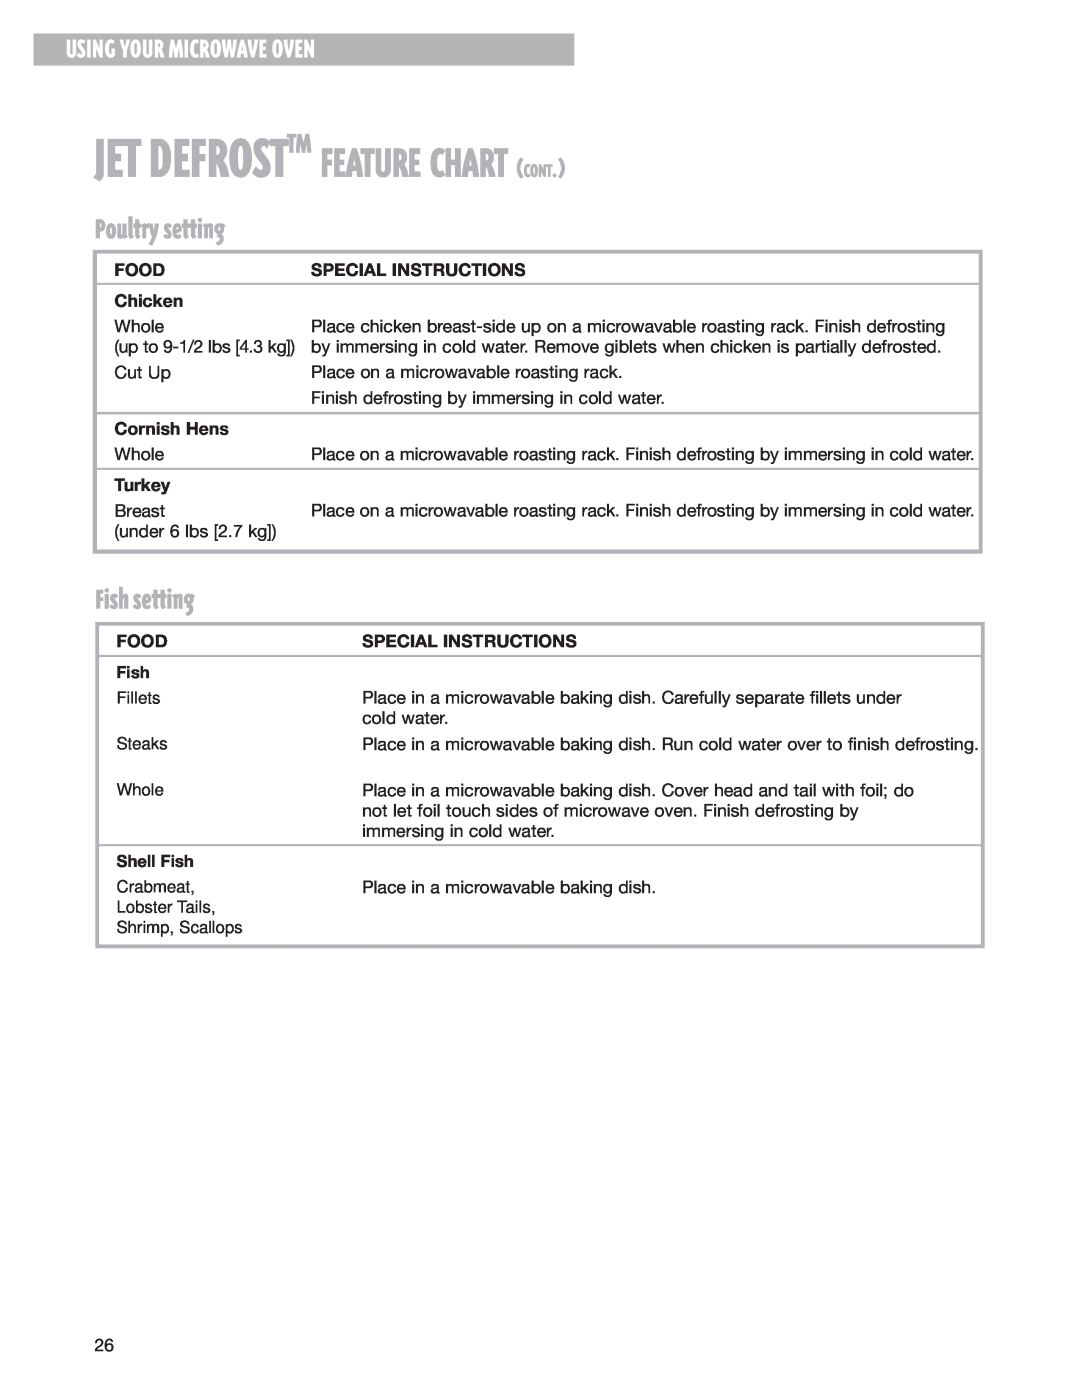 Whirlpool MH8150XJ Jet Defrosttm Feature Chart Cont, Poultry setting, Fish setting, Using Your Microwave Oven 